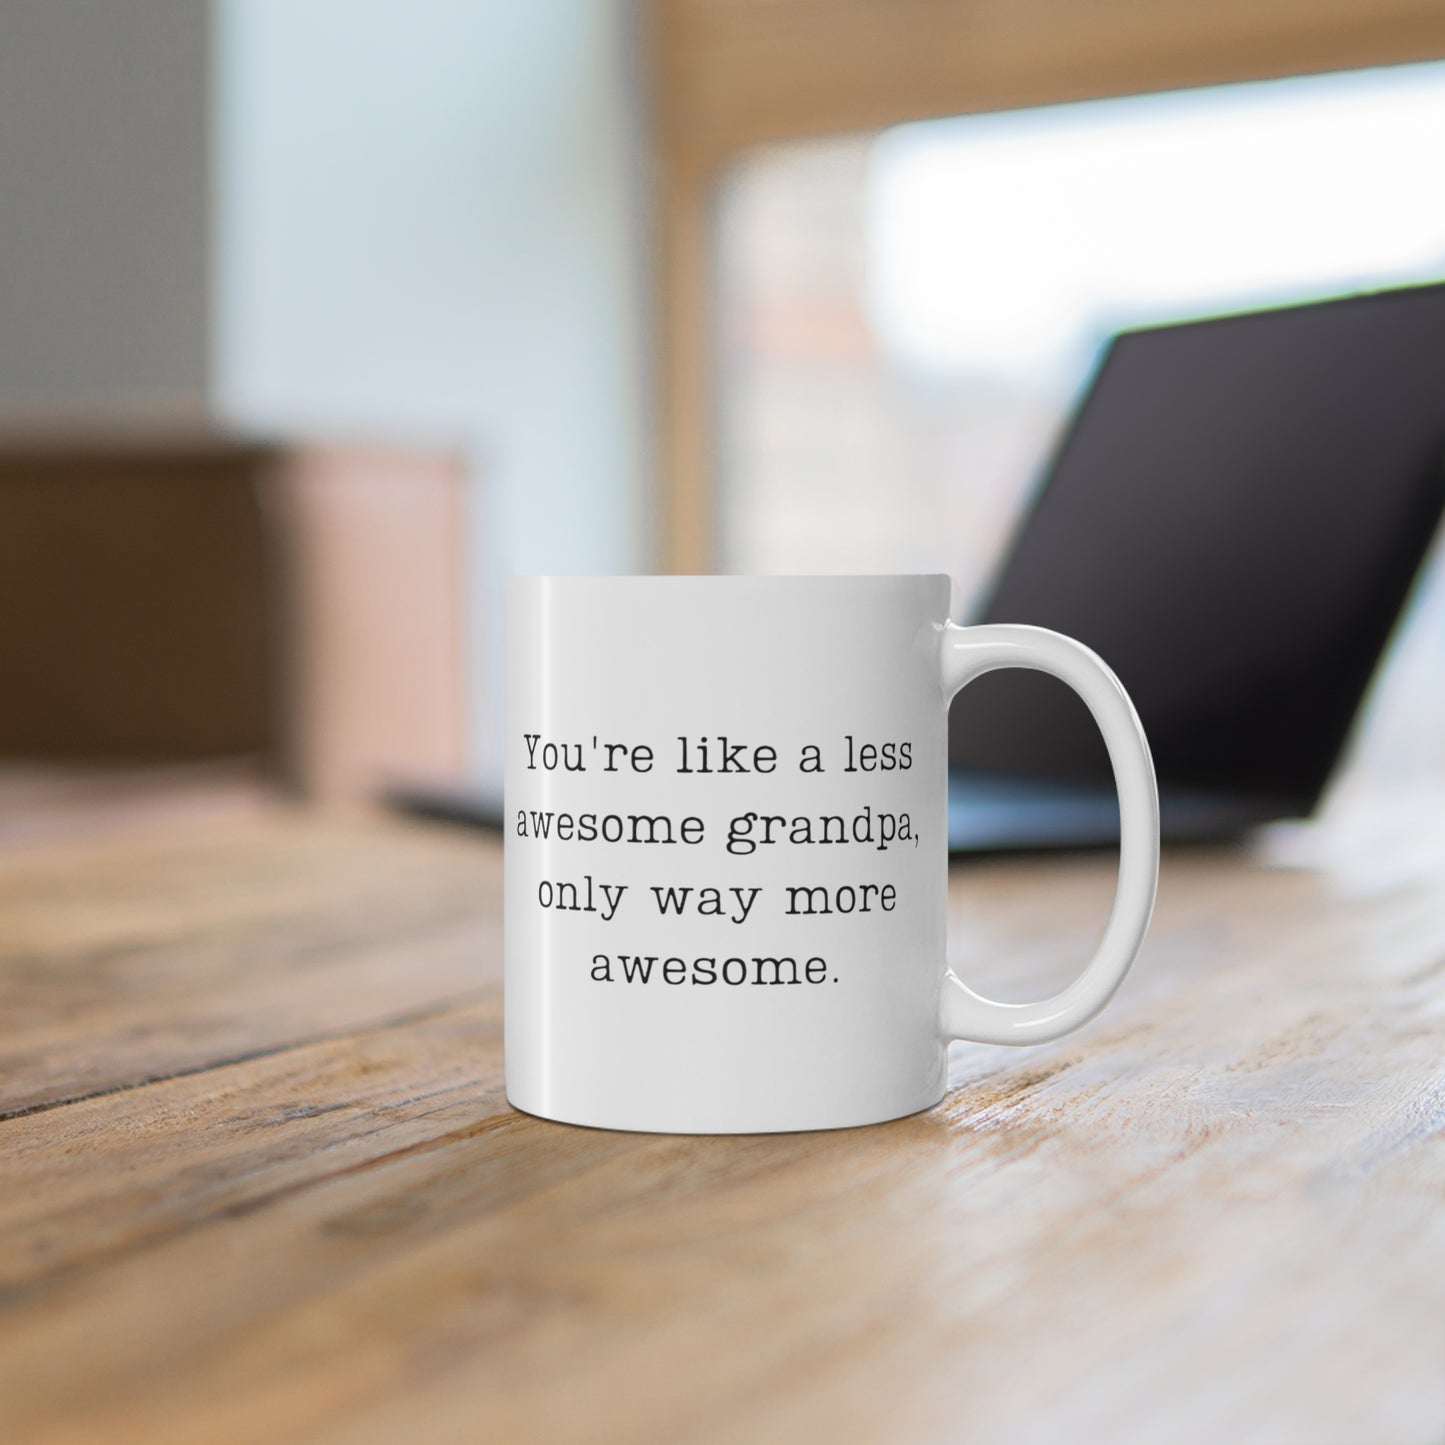 You're Like A Less Awesome Grandpa, Only Way More Awesome | Funny, Snarky Gift | White Ceramic Mug, Typewriter Font